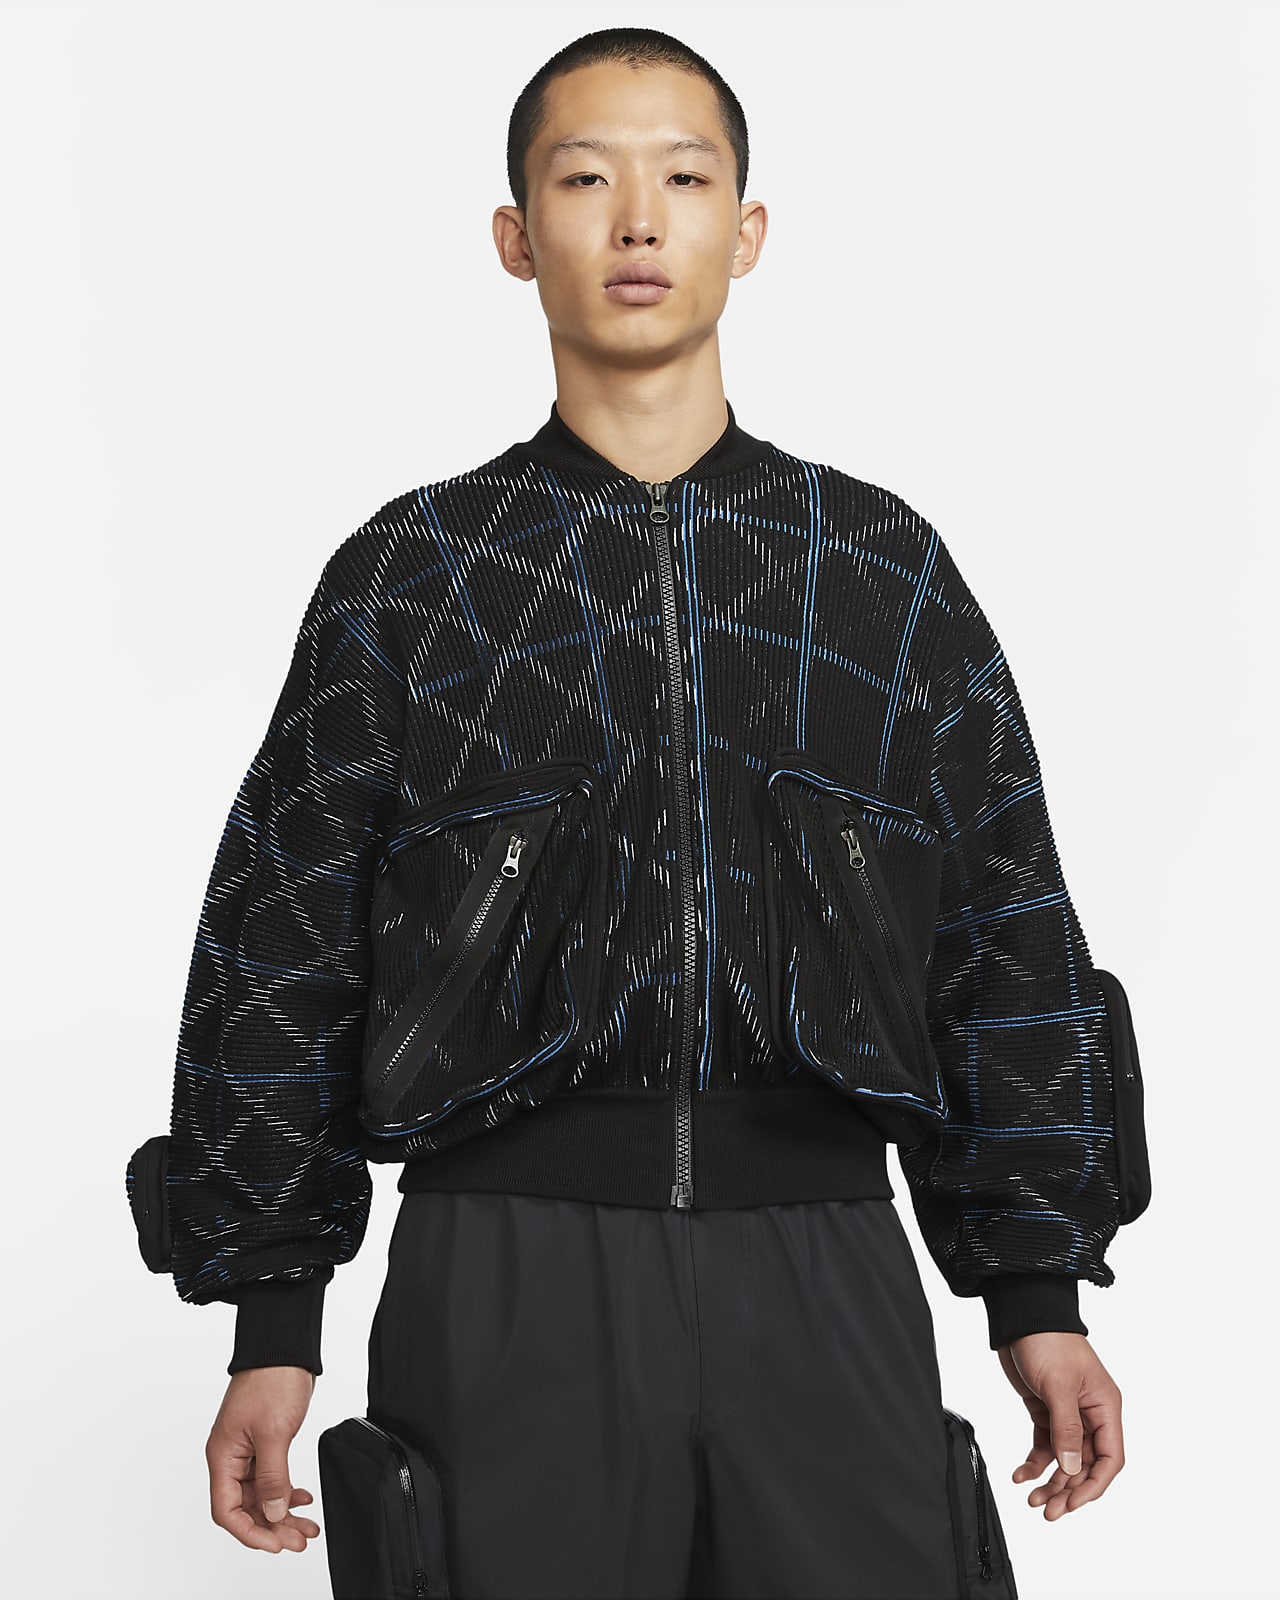 Nike x Undercover Knit MA-1 Bomber 